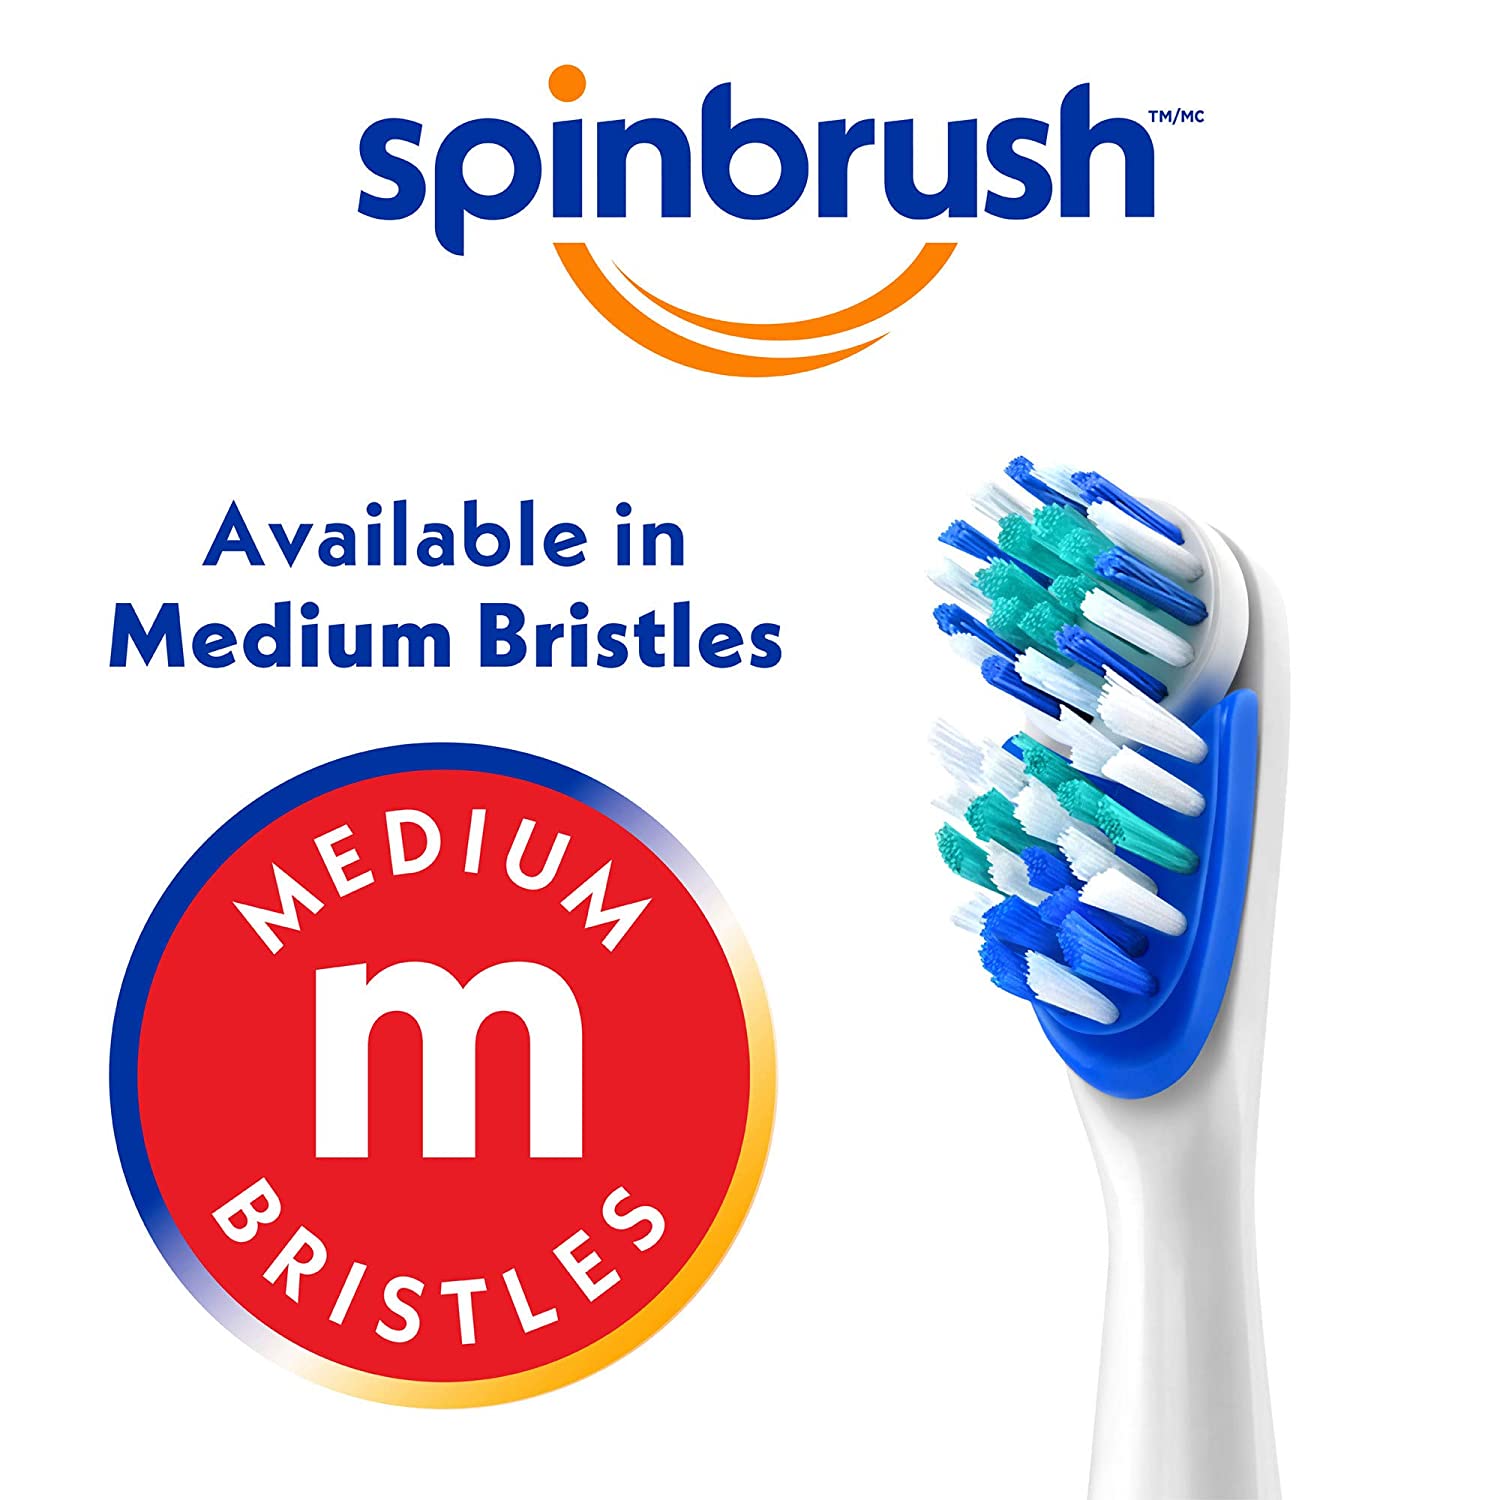 Spinbrush PRO CLEAN Battery Powered Toothbrush, Soft Bristles, 1 Count, Gold or Blue Color May Vary